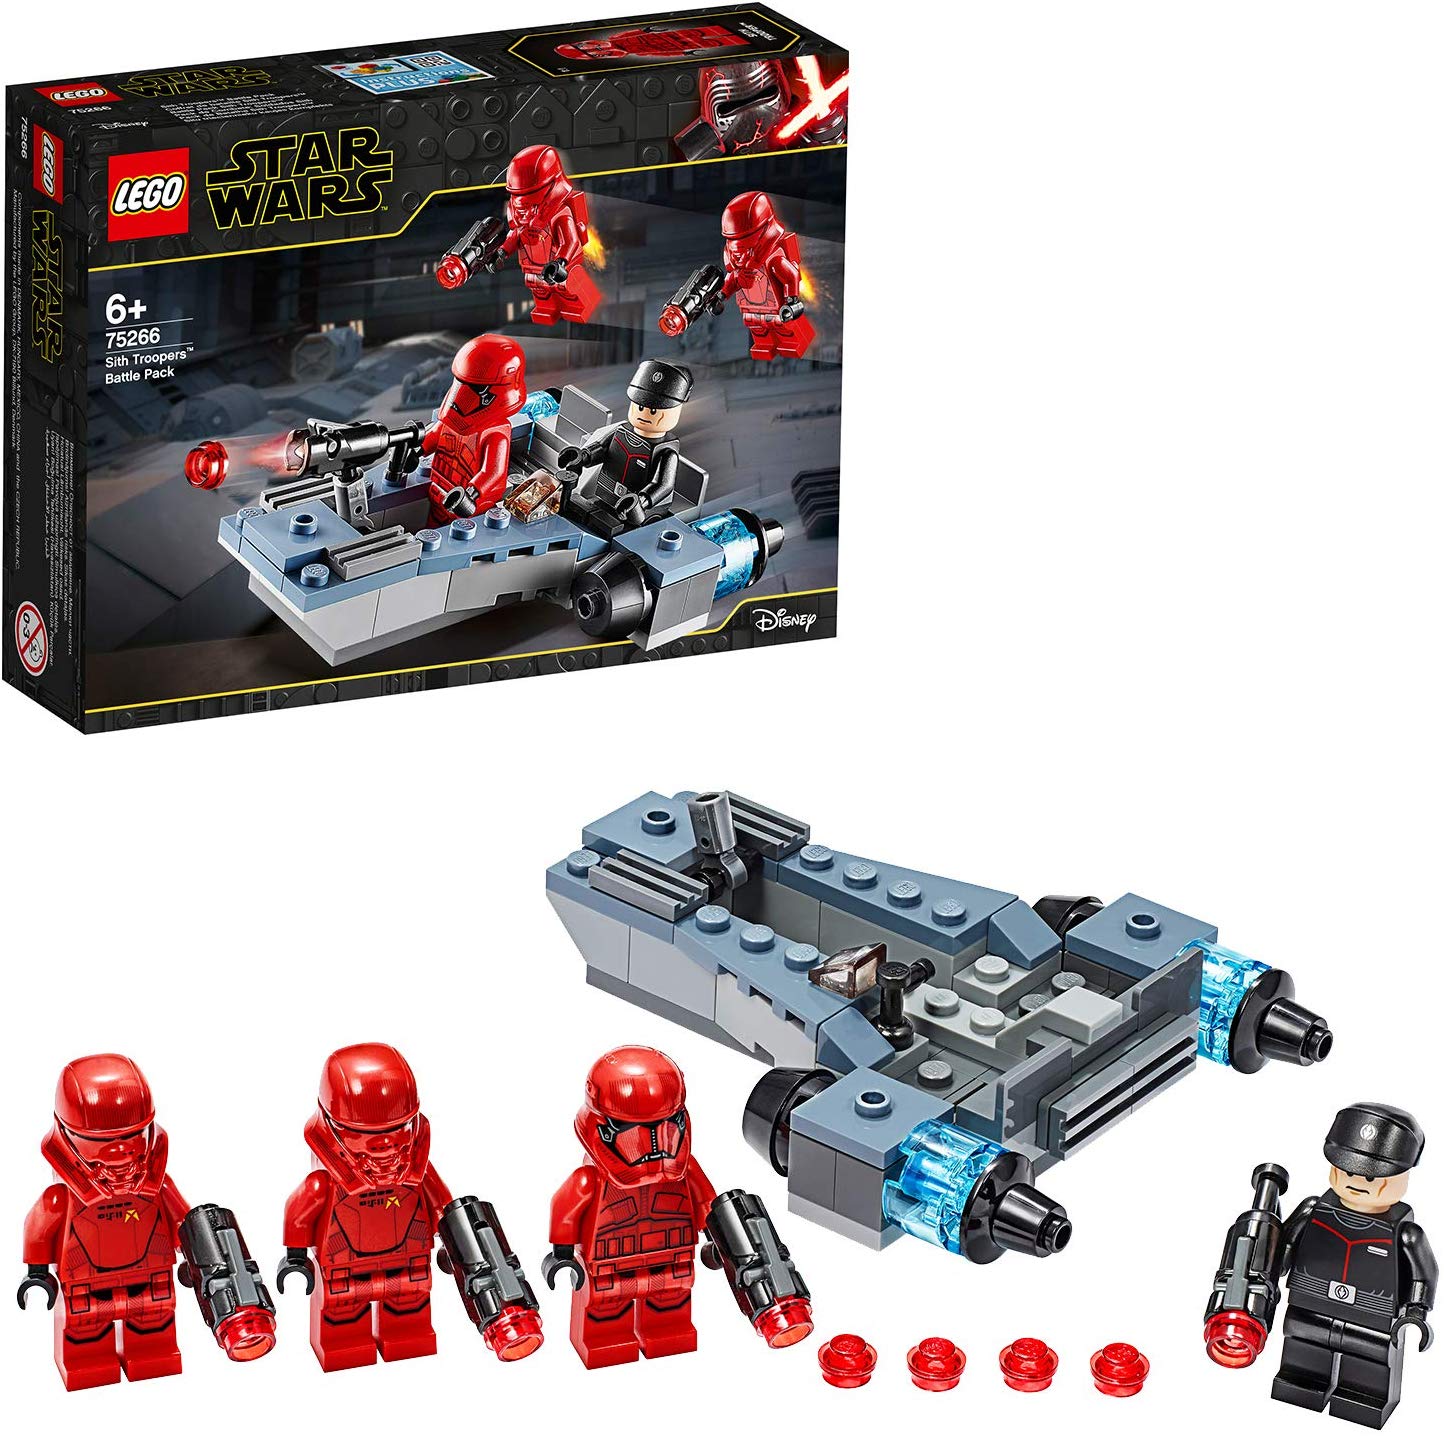 Lego 75266 Sith Troopers Battle Pack, Star Wars, Construction Kit